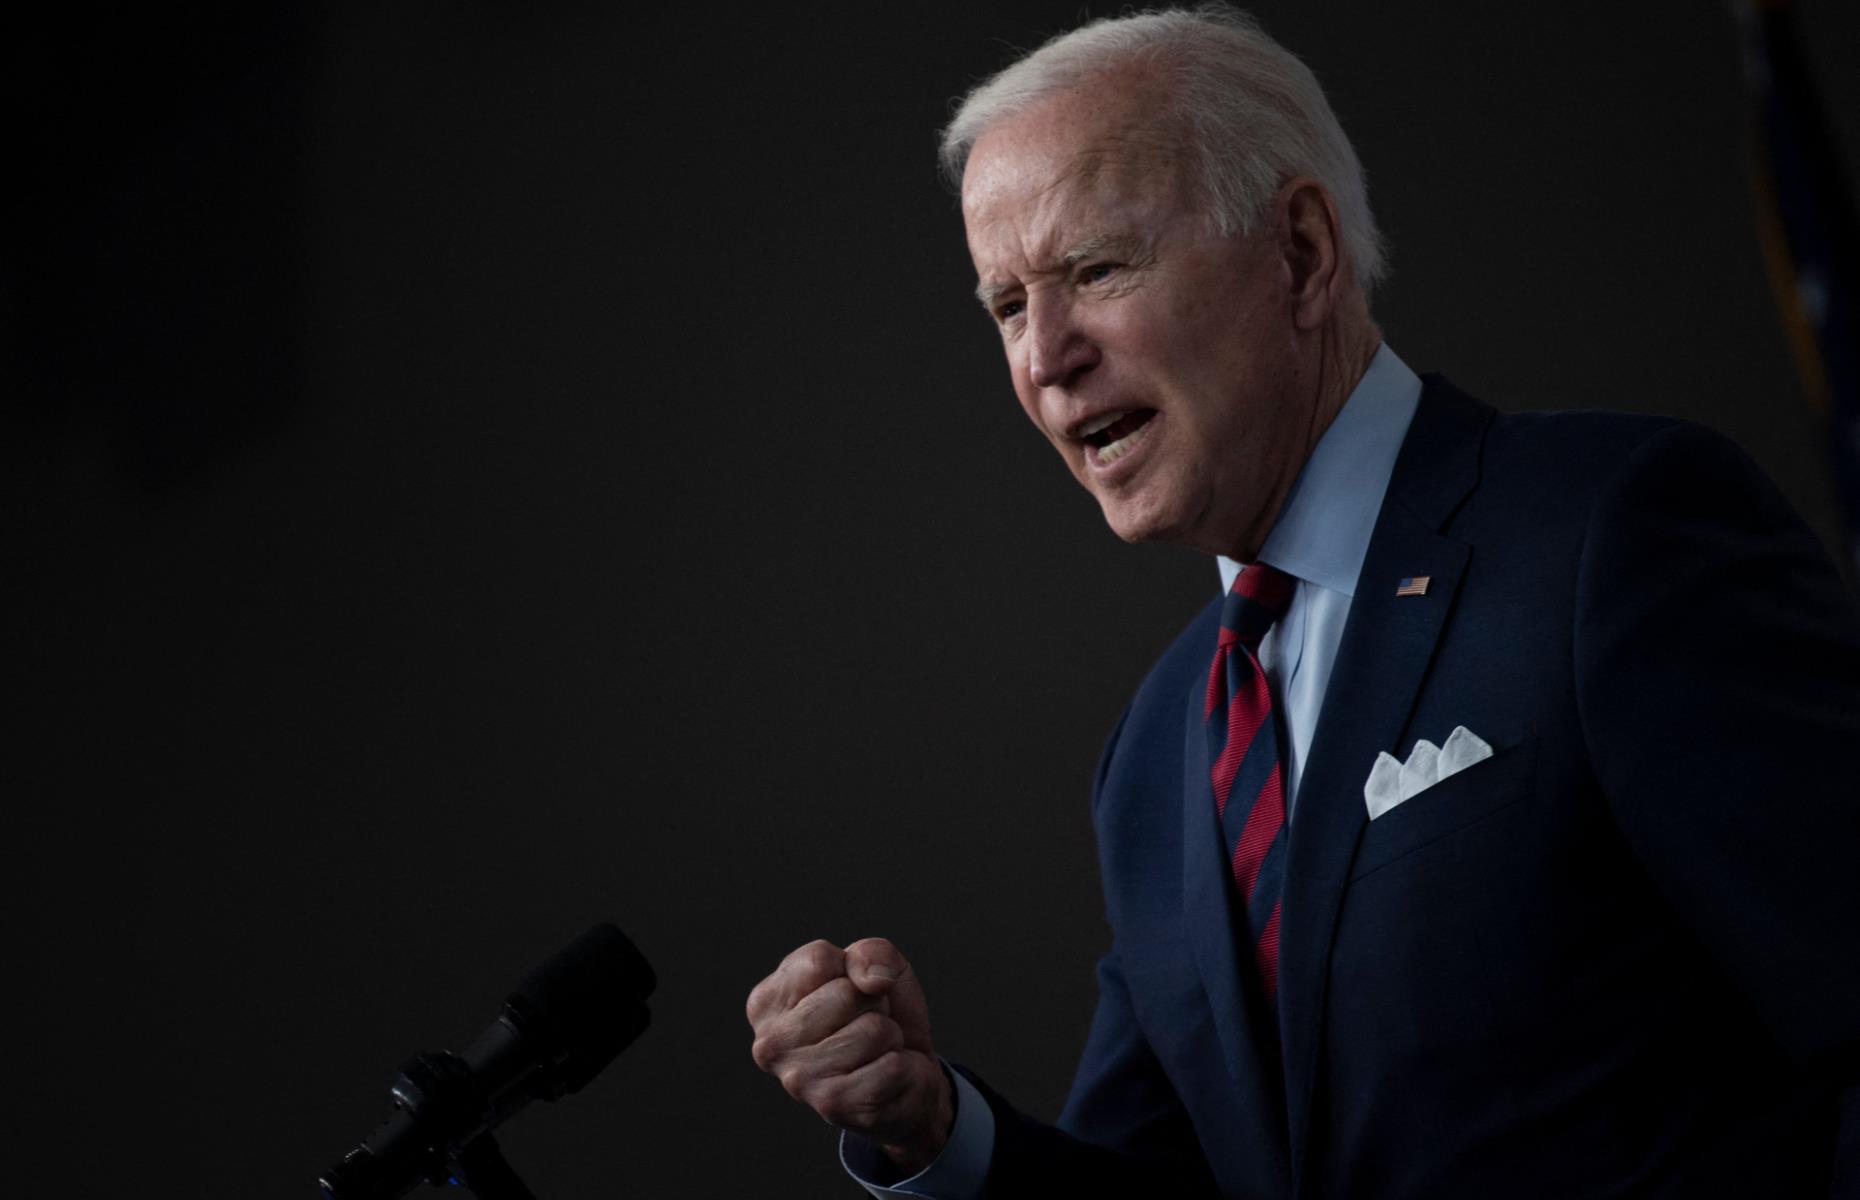 Biden is set to raise taxes for the rich